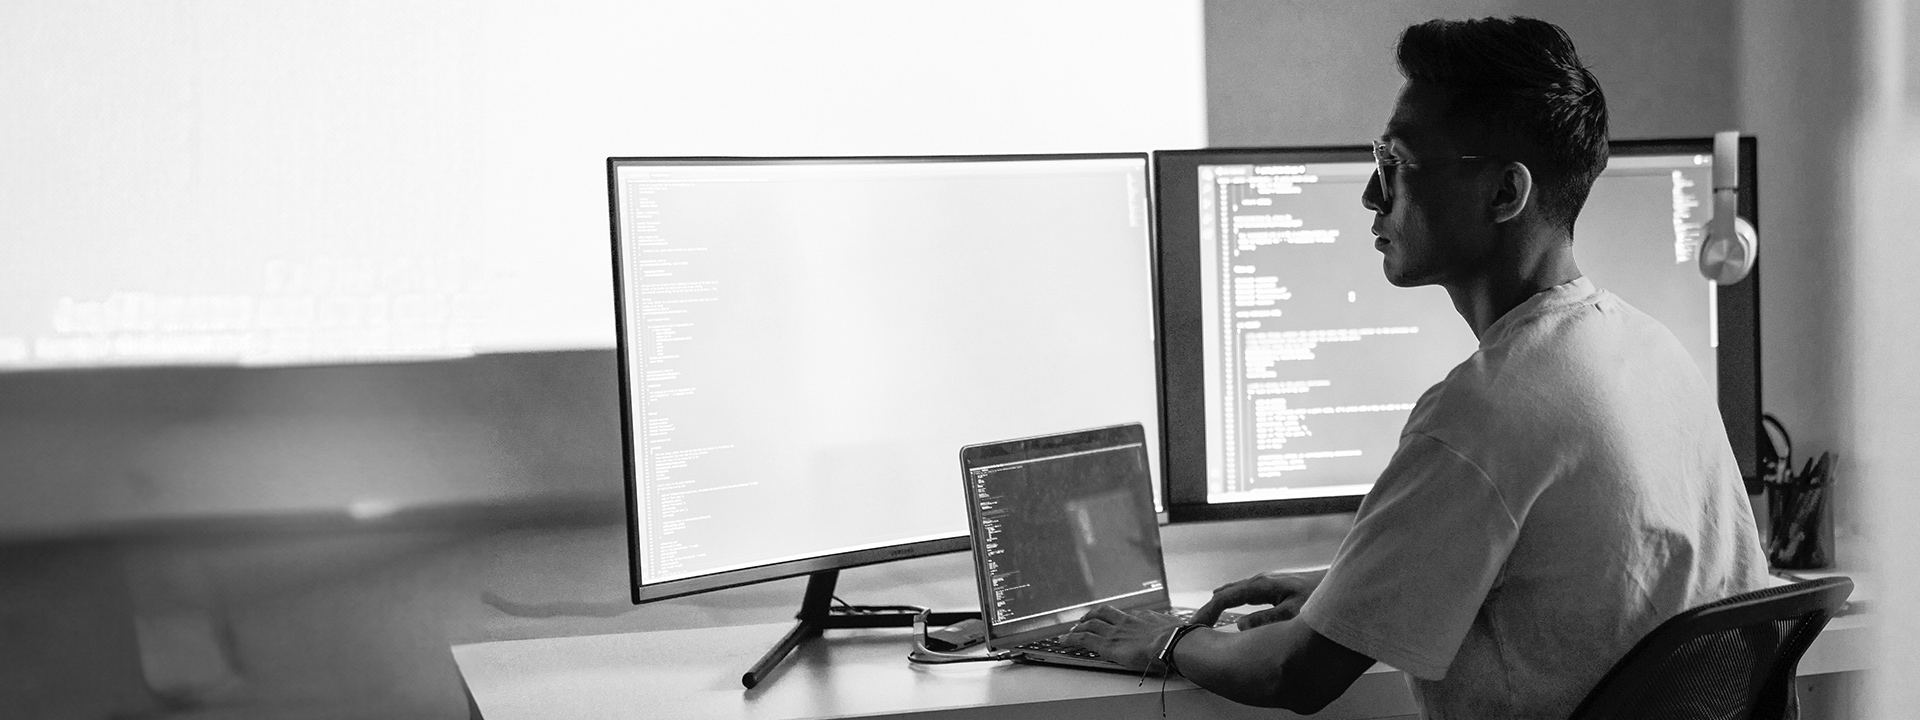 A man working on a computer with multiple monitors displaying code